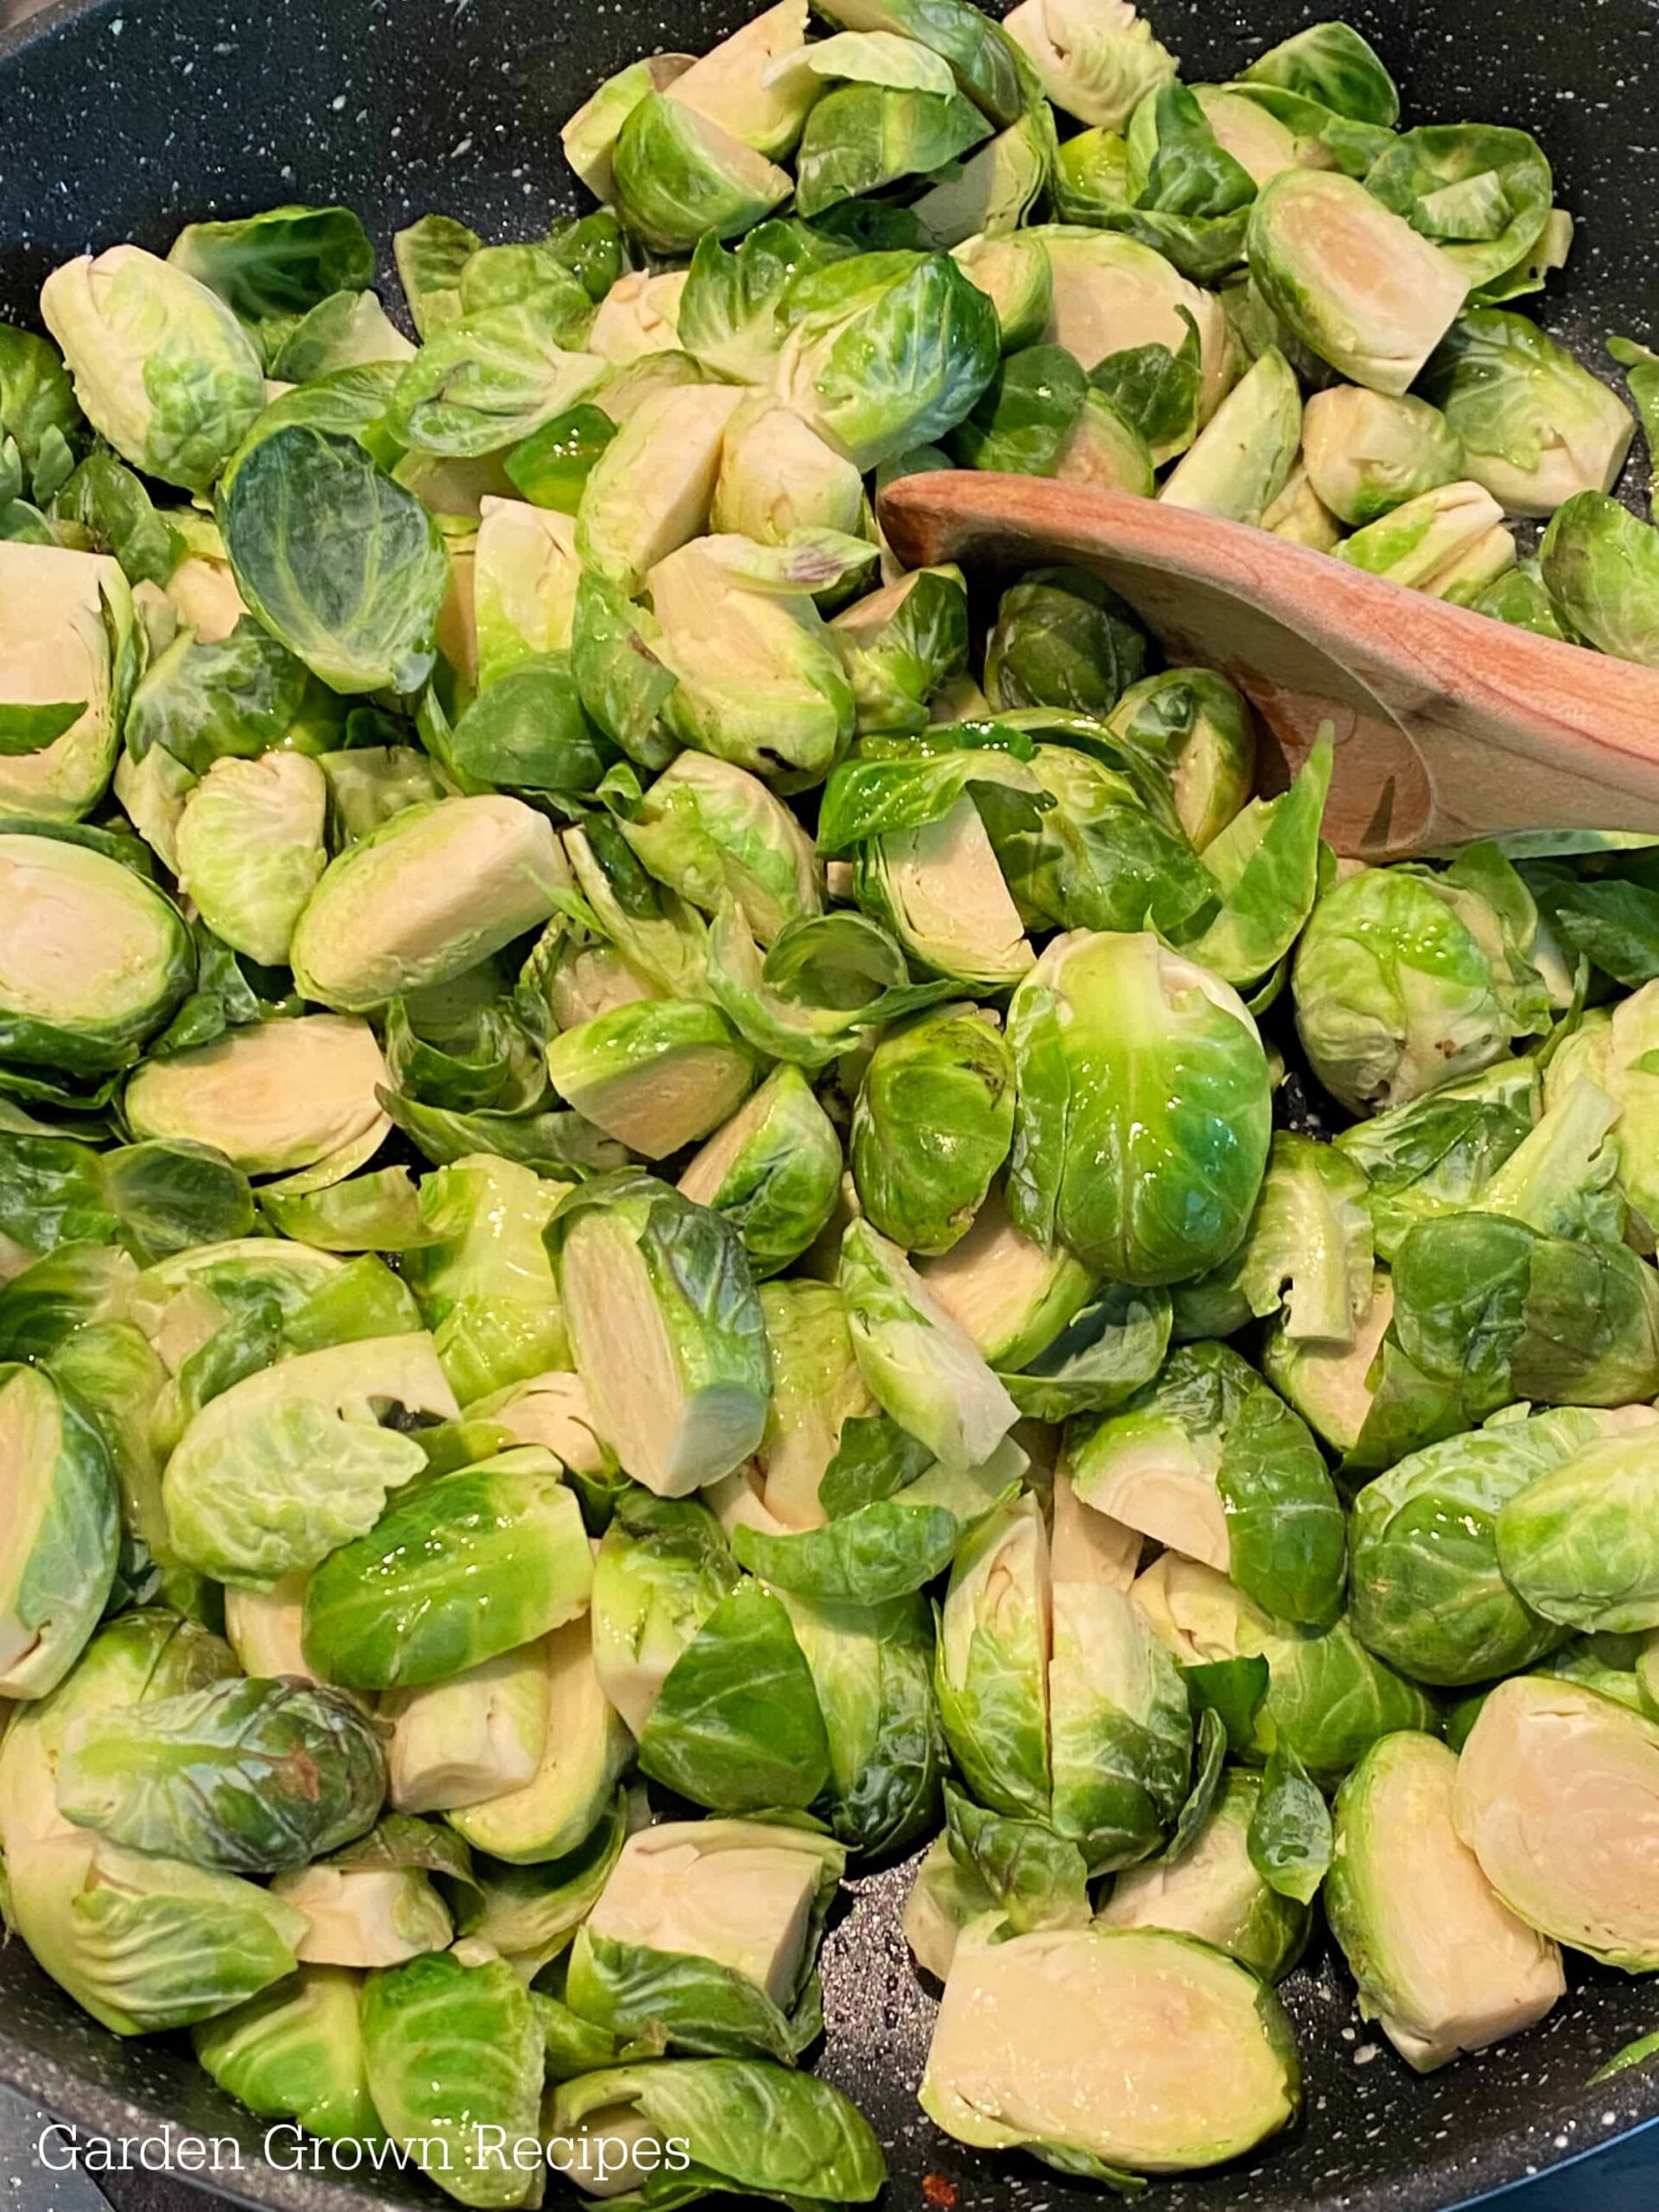 saute brussel sprouts in bacon grease